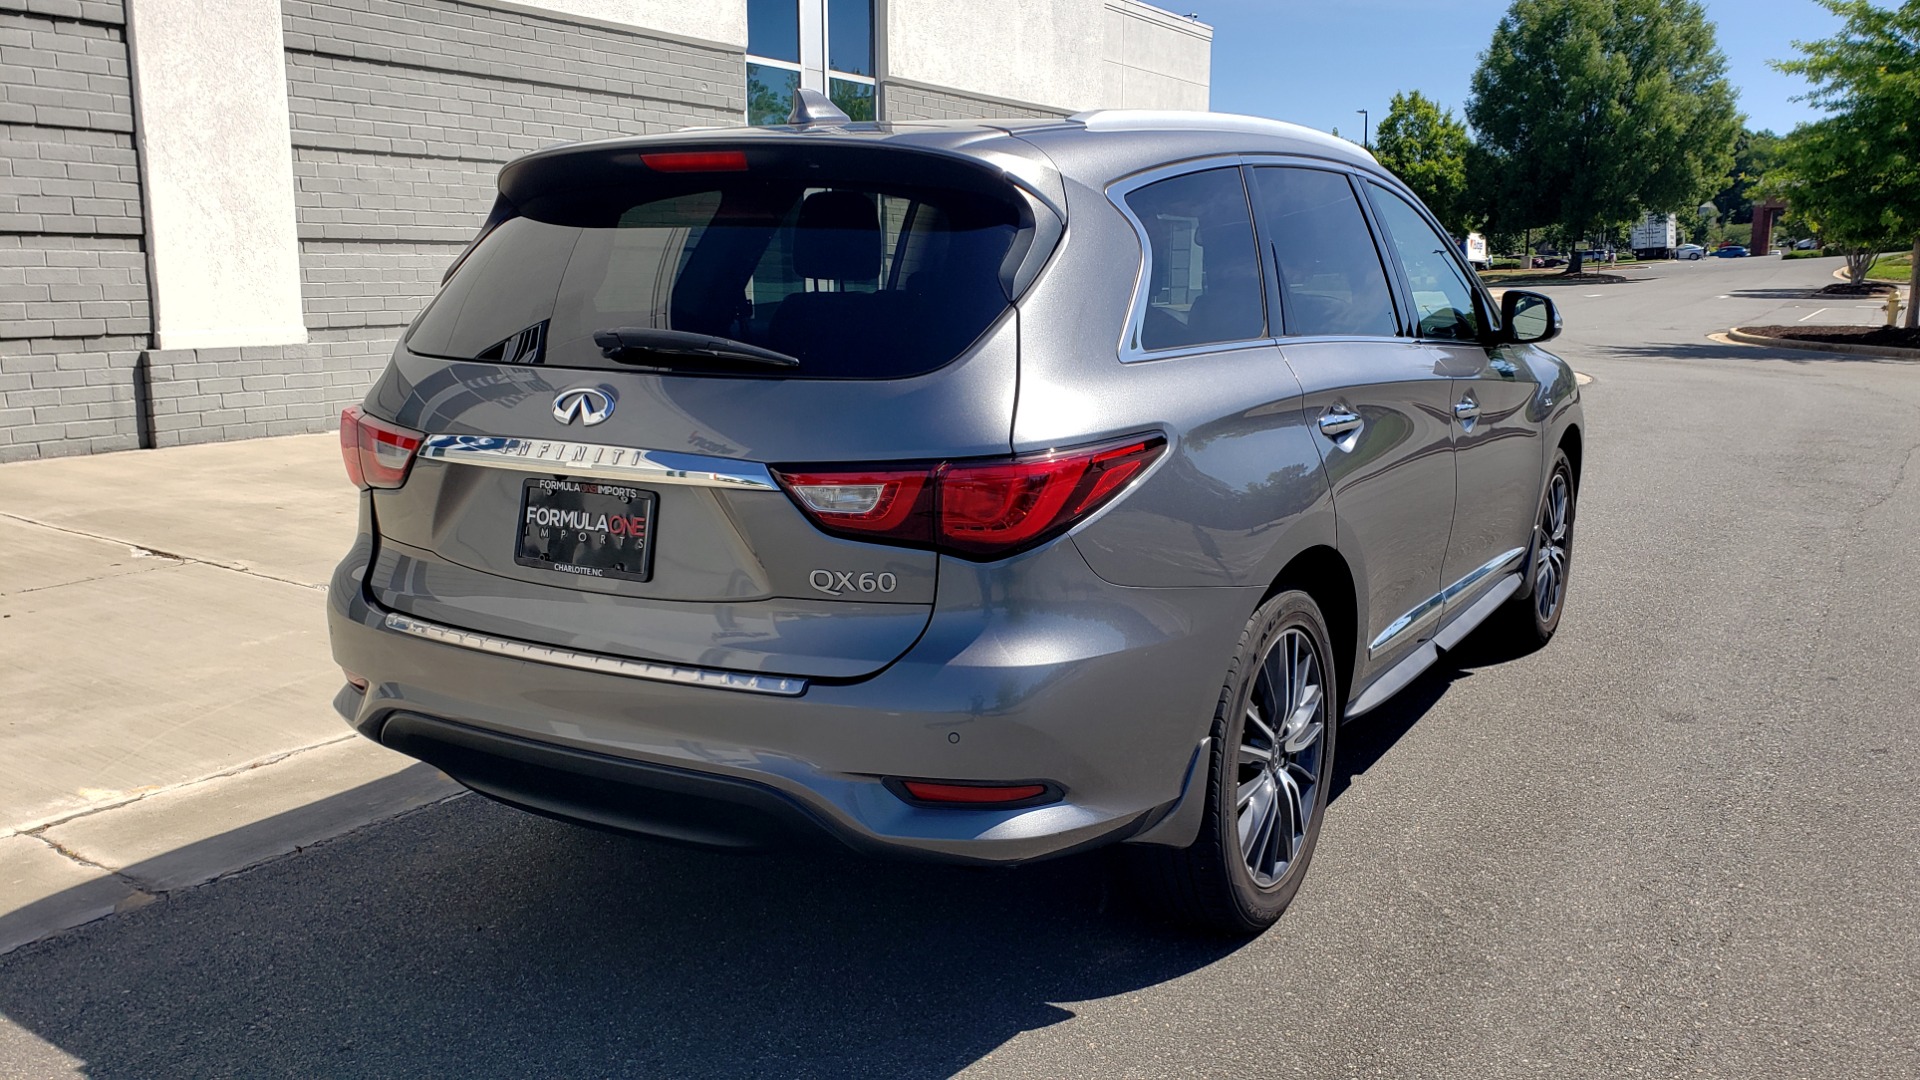 Used 2018 INFINITI QX60 3.5L V6 / FWD / CVT TRANS / NAV / SUNROOF / 3-ROWS / REARVIEW for sale Sold at Formula Imports in Charlotte NC 28227 2